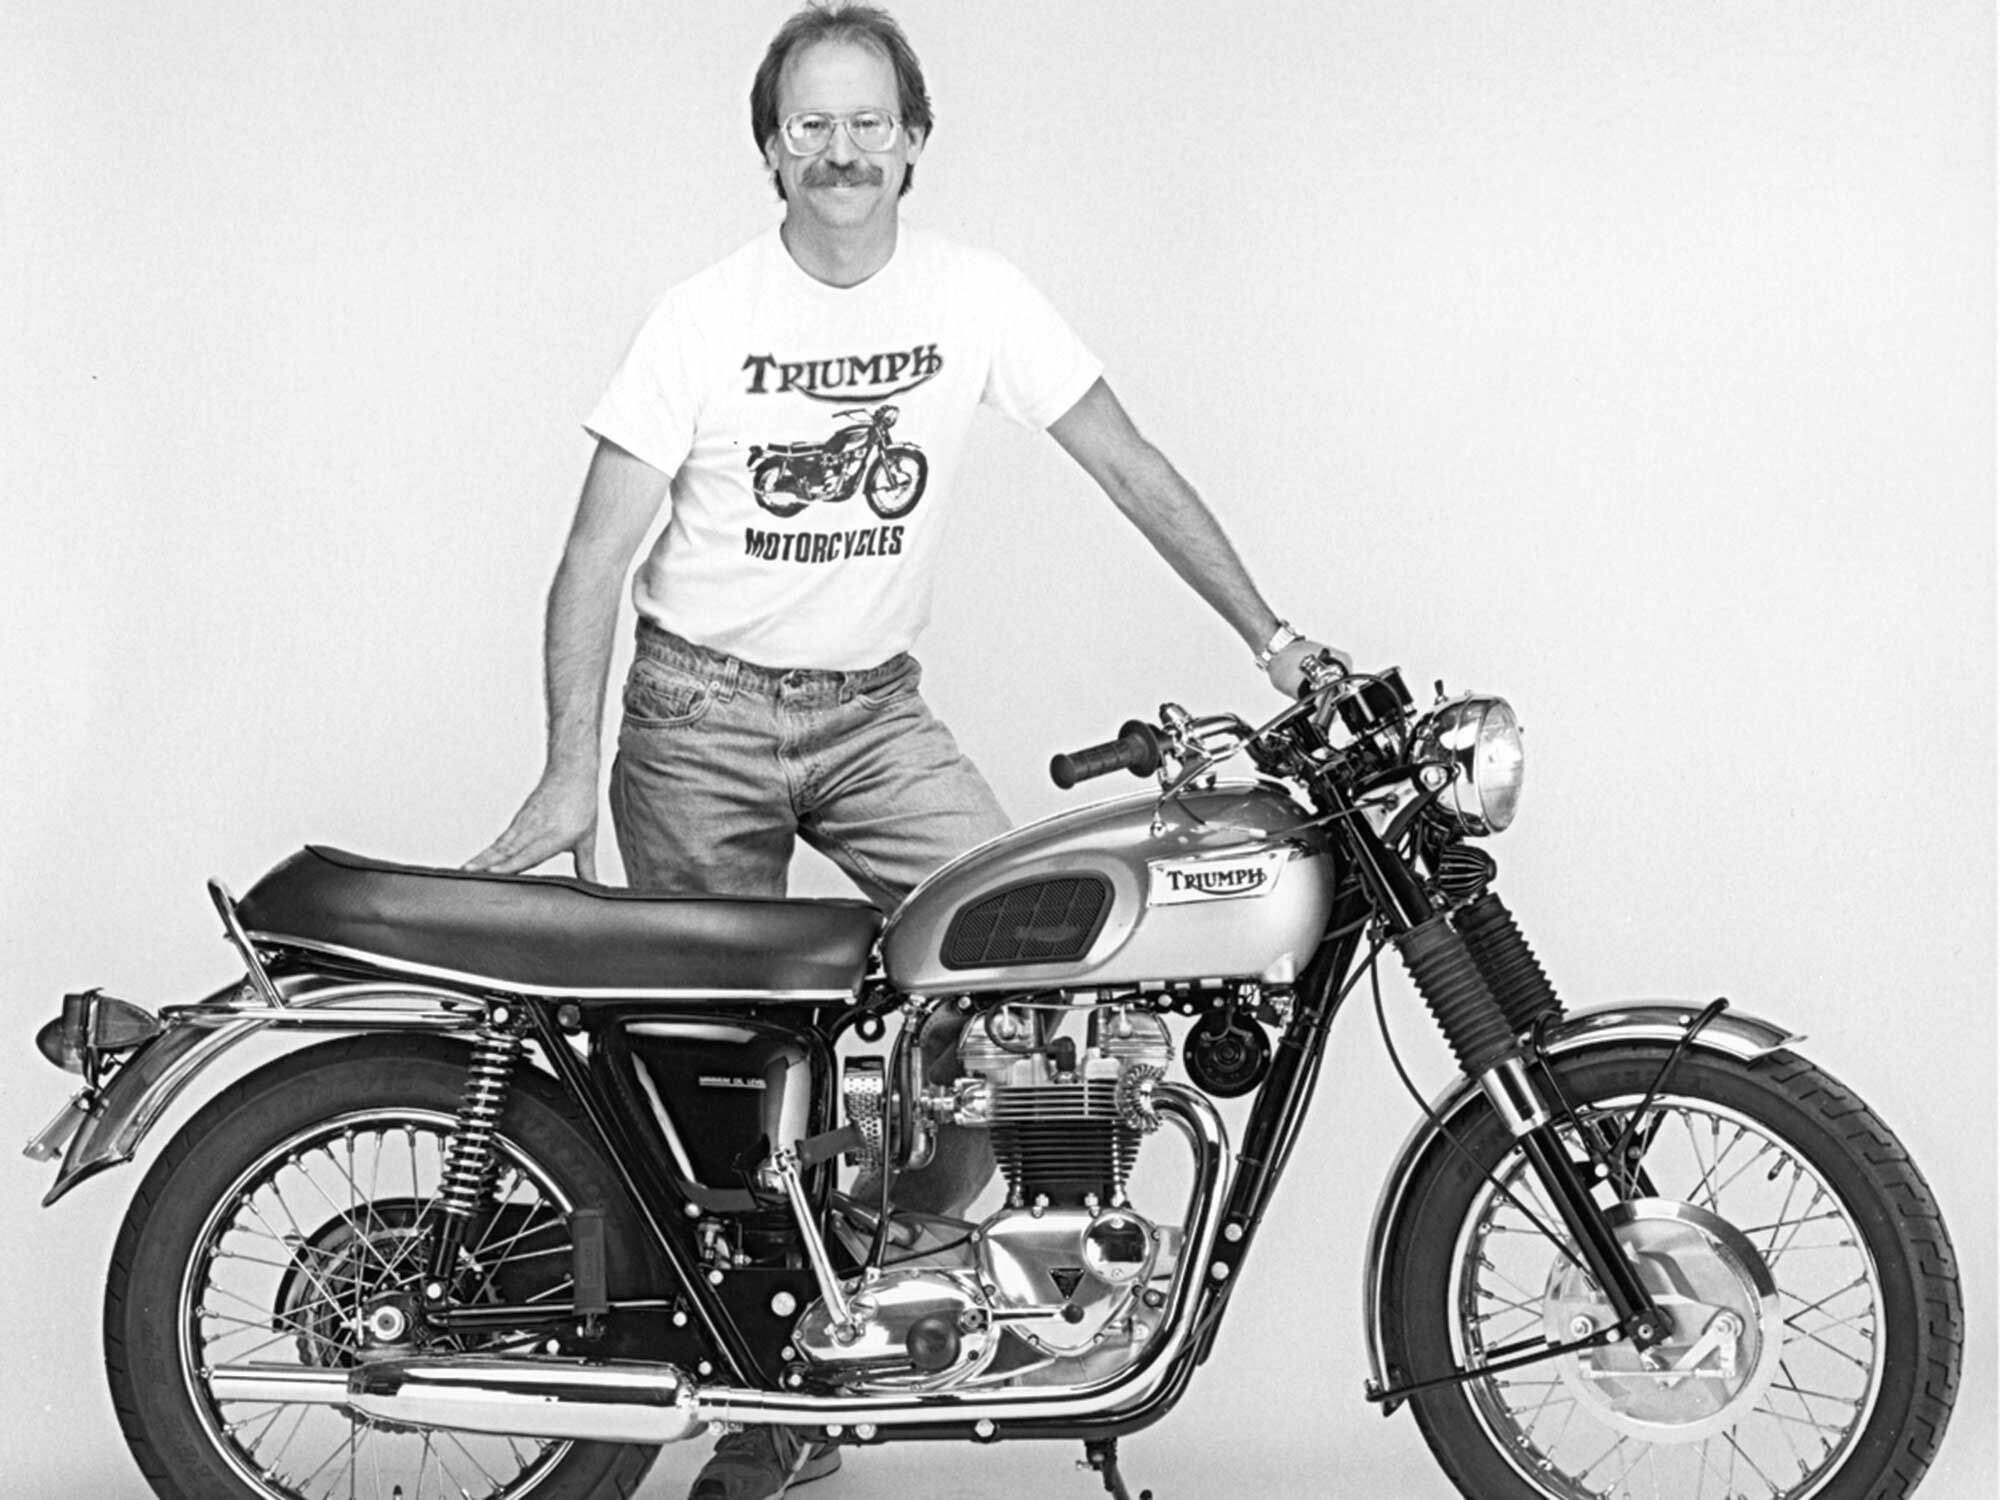 Storz with his restored 1970 Triumph TR6C, a duplicate of his first motorcycle that he enjoys occasionally riding today.